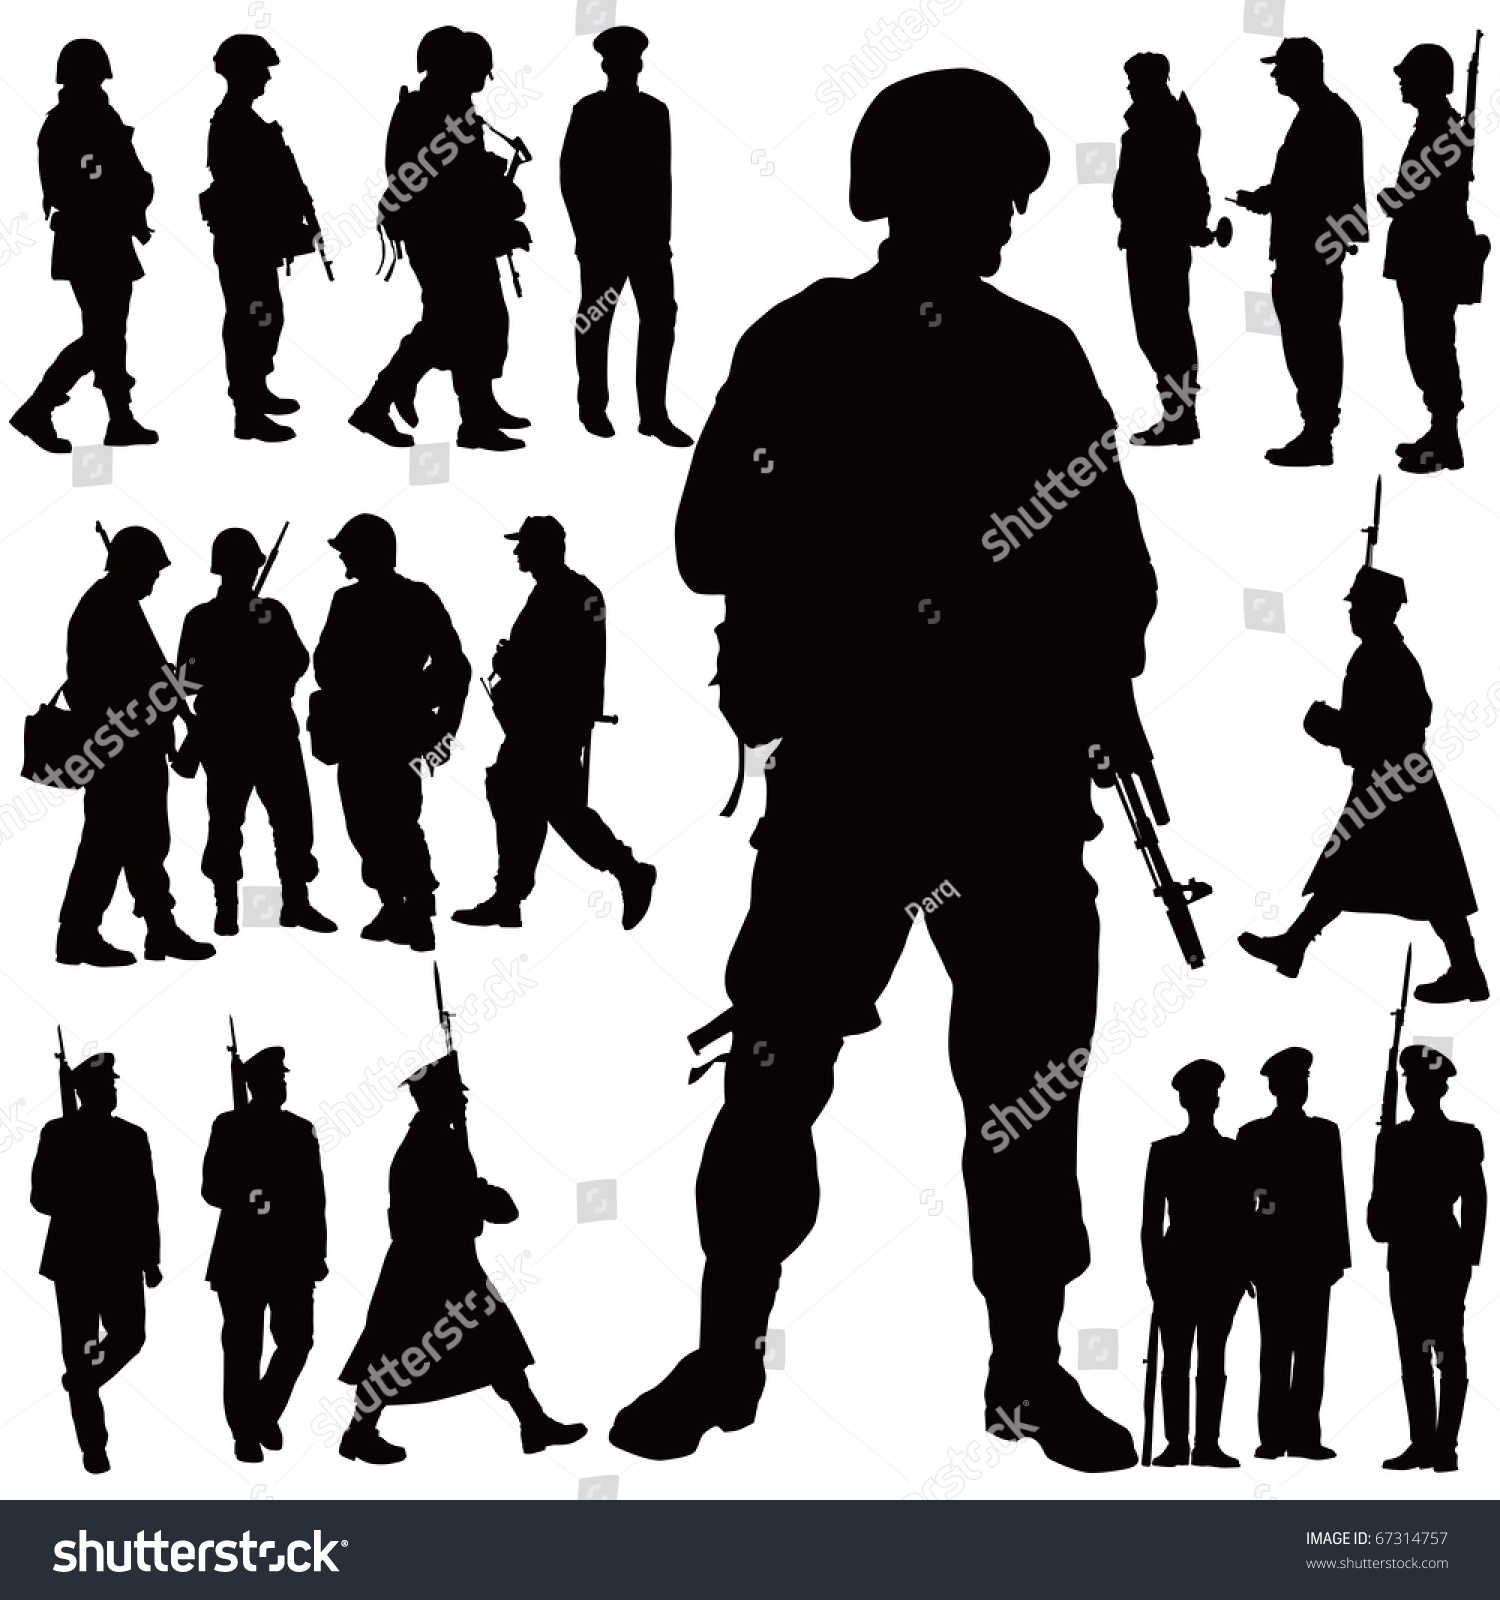 military clip art collection - photo #32